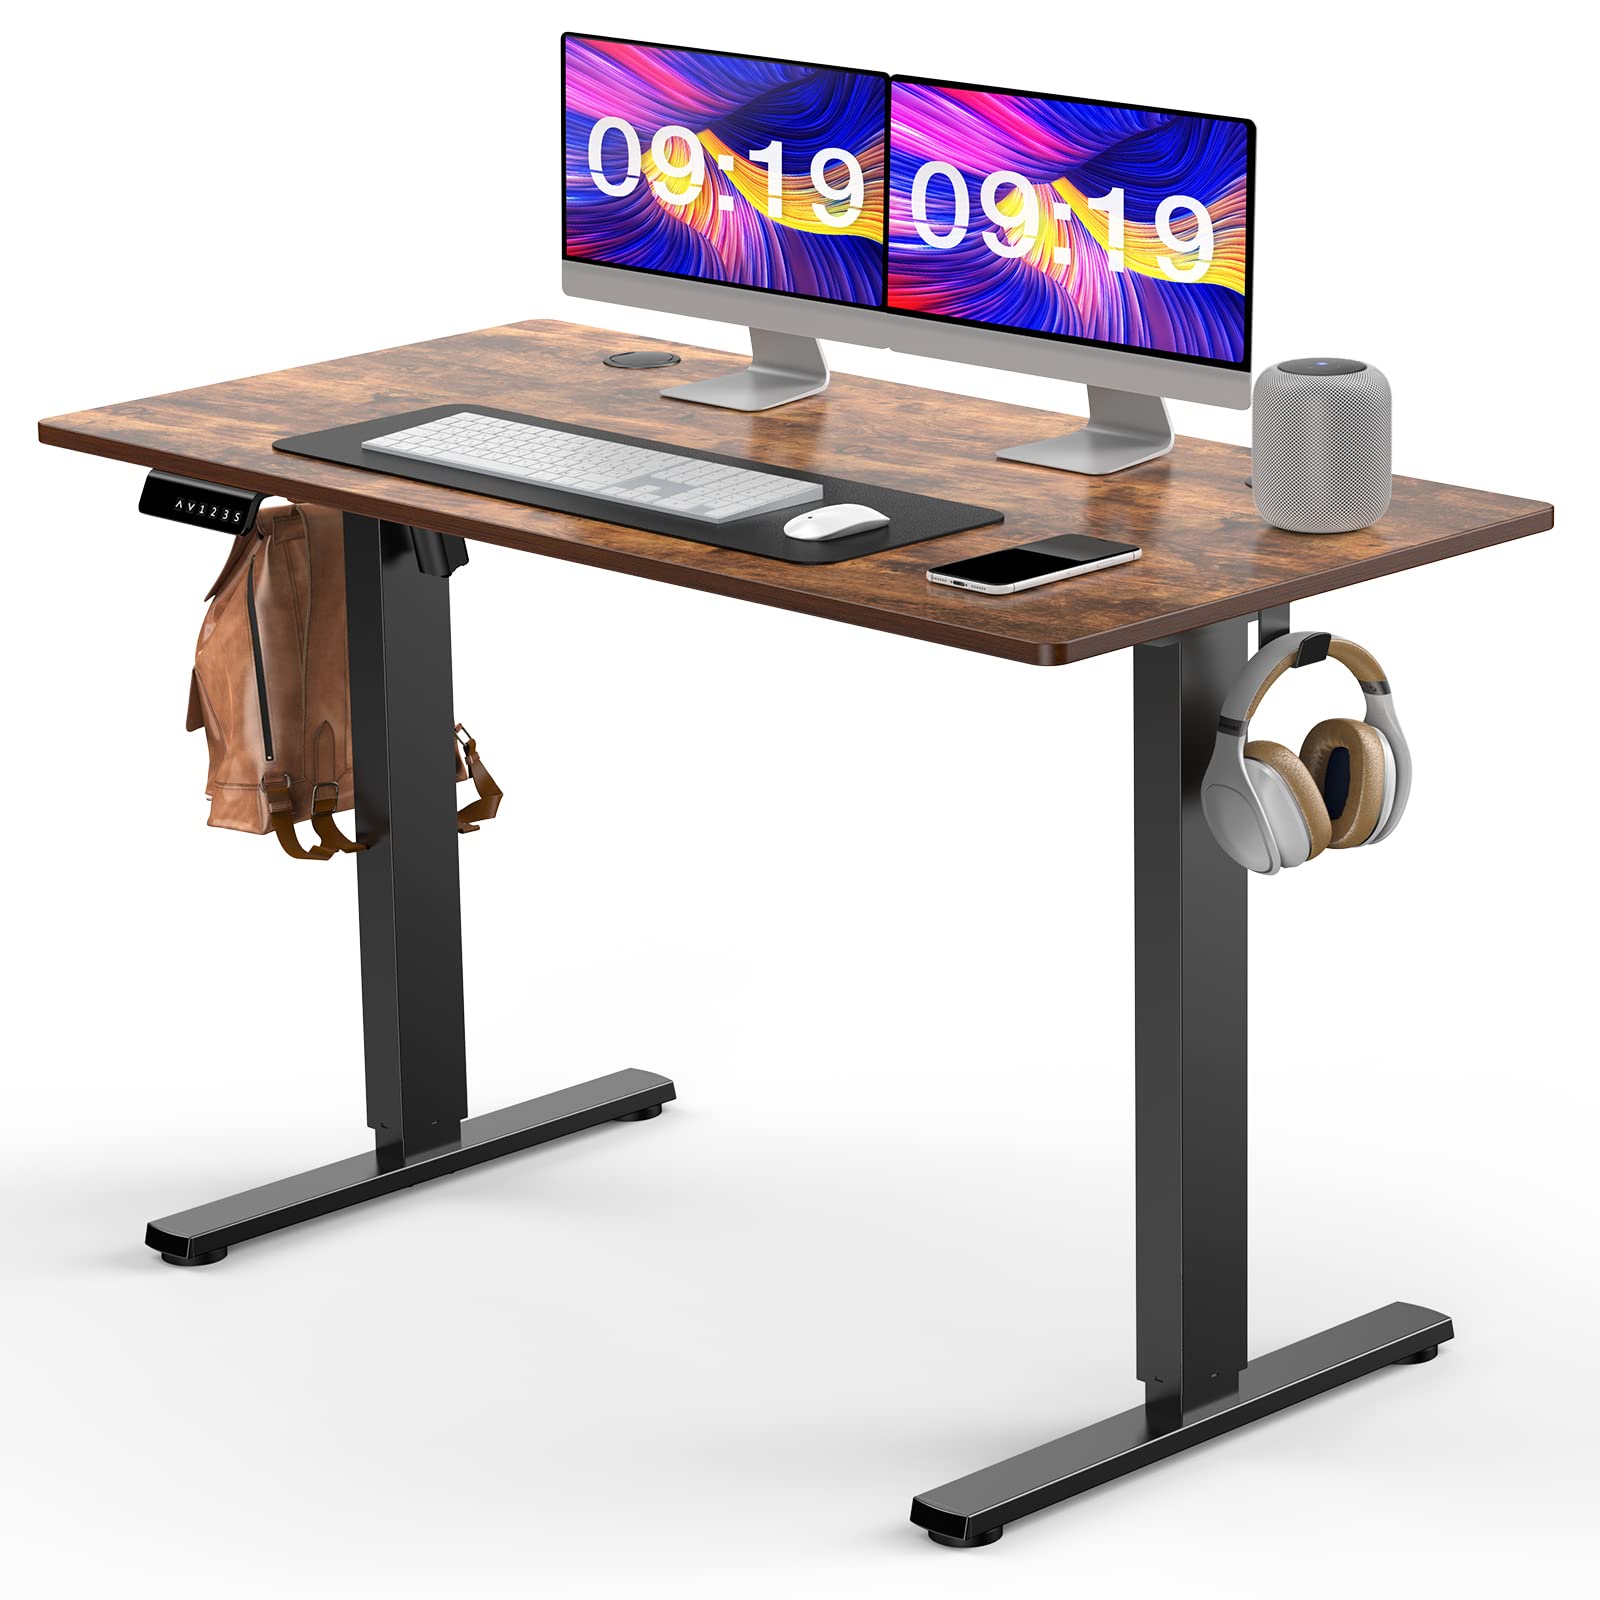 SMUg Standing Desk 40 x 24 Inches Electric Height Adjustable Home Office computer Table with Memory controllerHeadphone Hook, 40